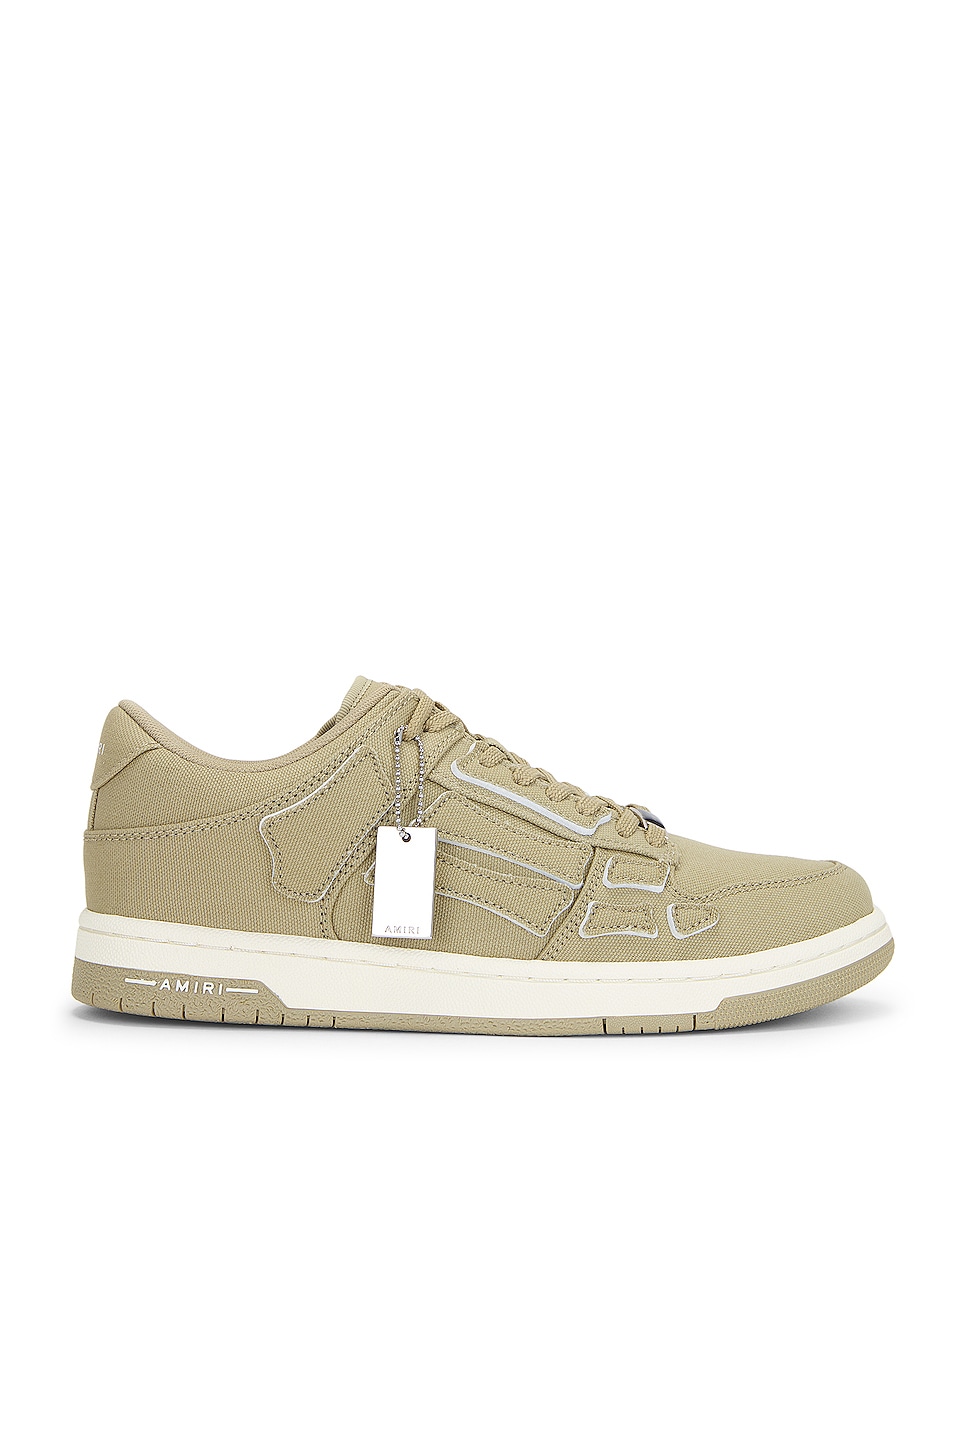 Image 1 of Amiri Chunky Canvas Skeleton Top Low Sneaker in Green